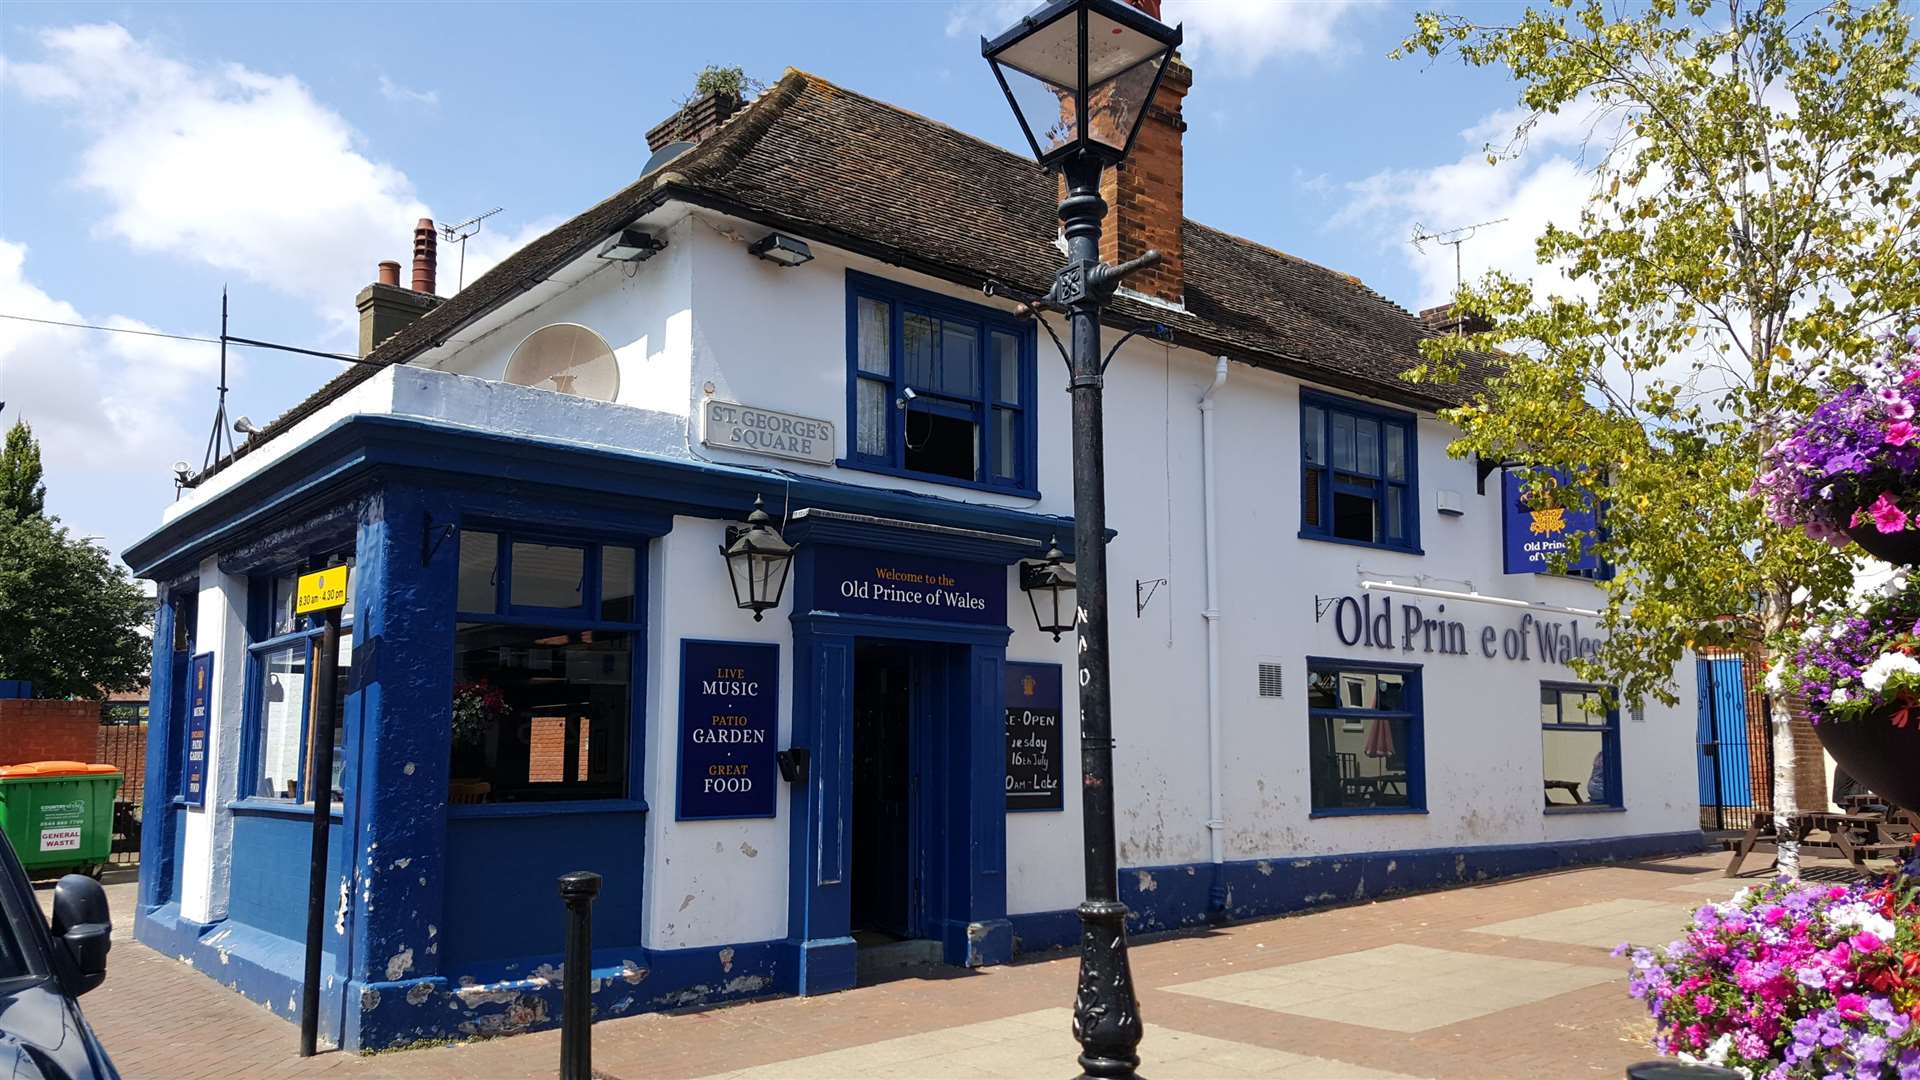 The Old Prince of Wales pub reopened last week